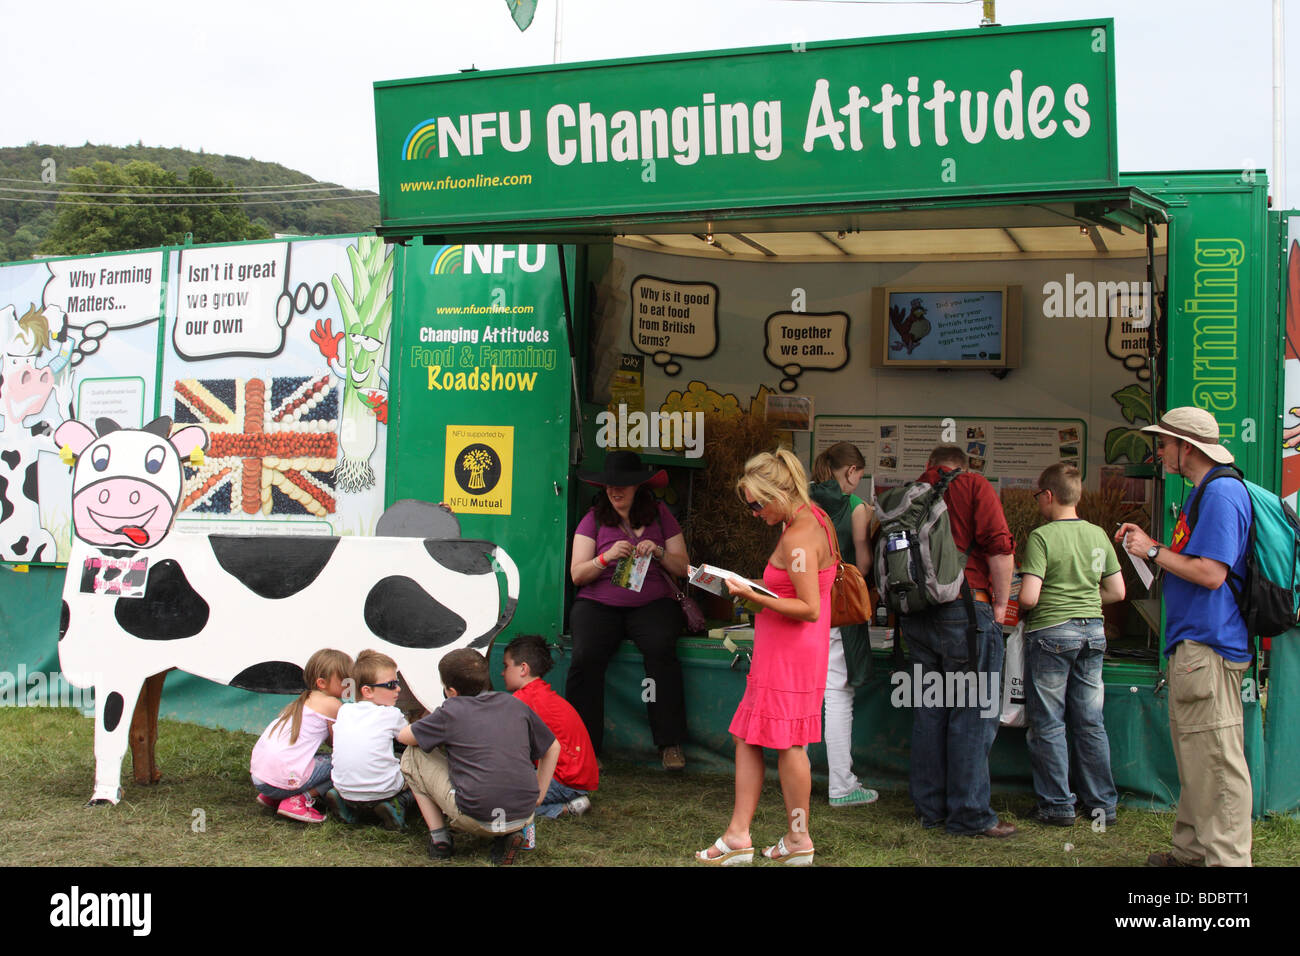 The NFU Changing Attitudes Roadshow at the Bakewell Show, Bakewell, Derbyshire, England, U.K. Stock Photo